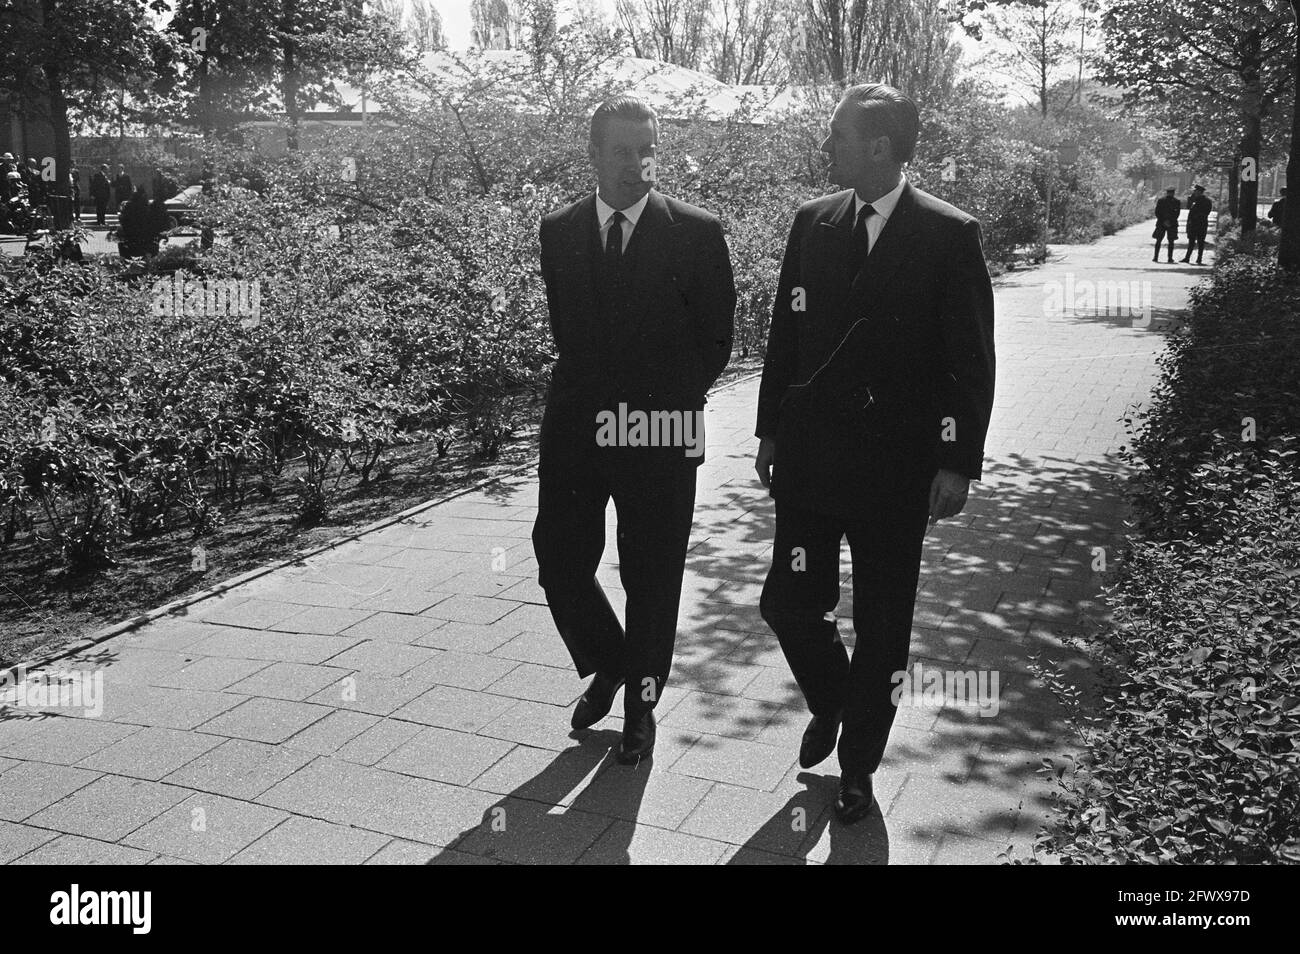 Opening NATO conference at The Hague, Schroder and prof. Carstens, May 12, 1964, The Netherlands, 20th century press agency photo, news to remember, documentary, historic photography 1945-1990, visual stories, human history of the Twentieth Century, capturing moments in time Stock Photo